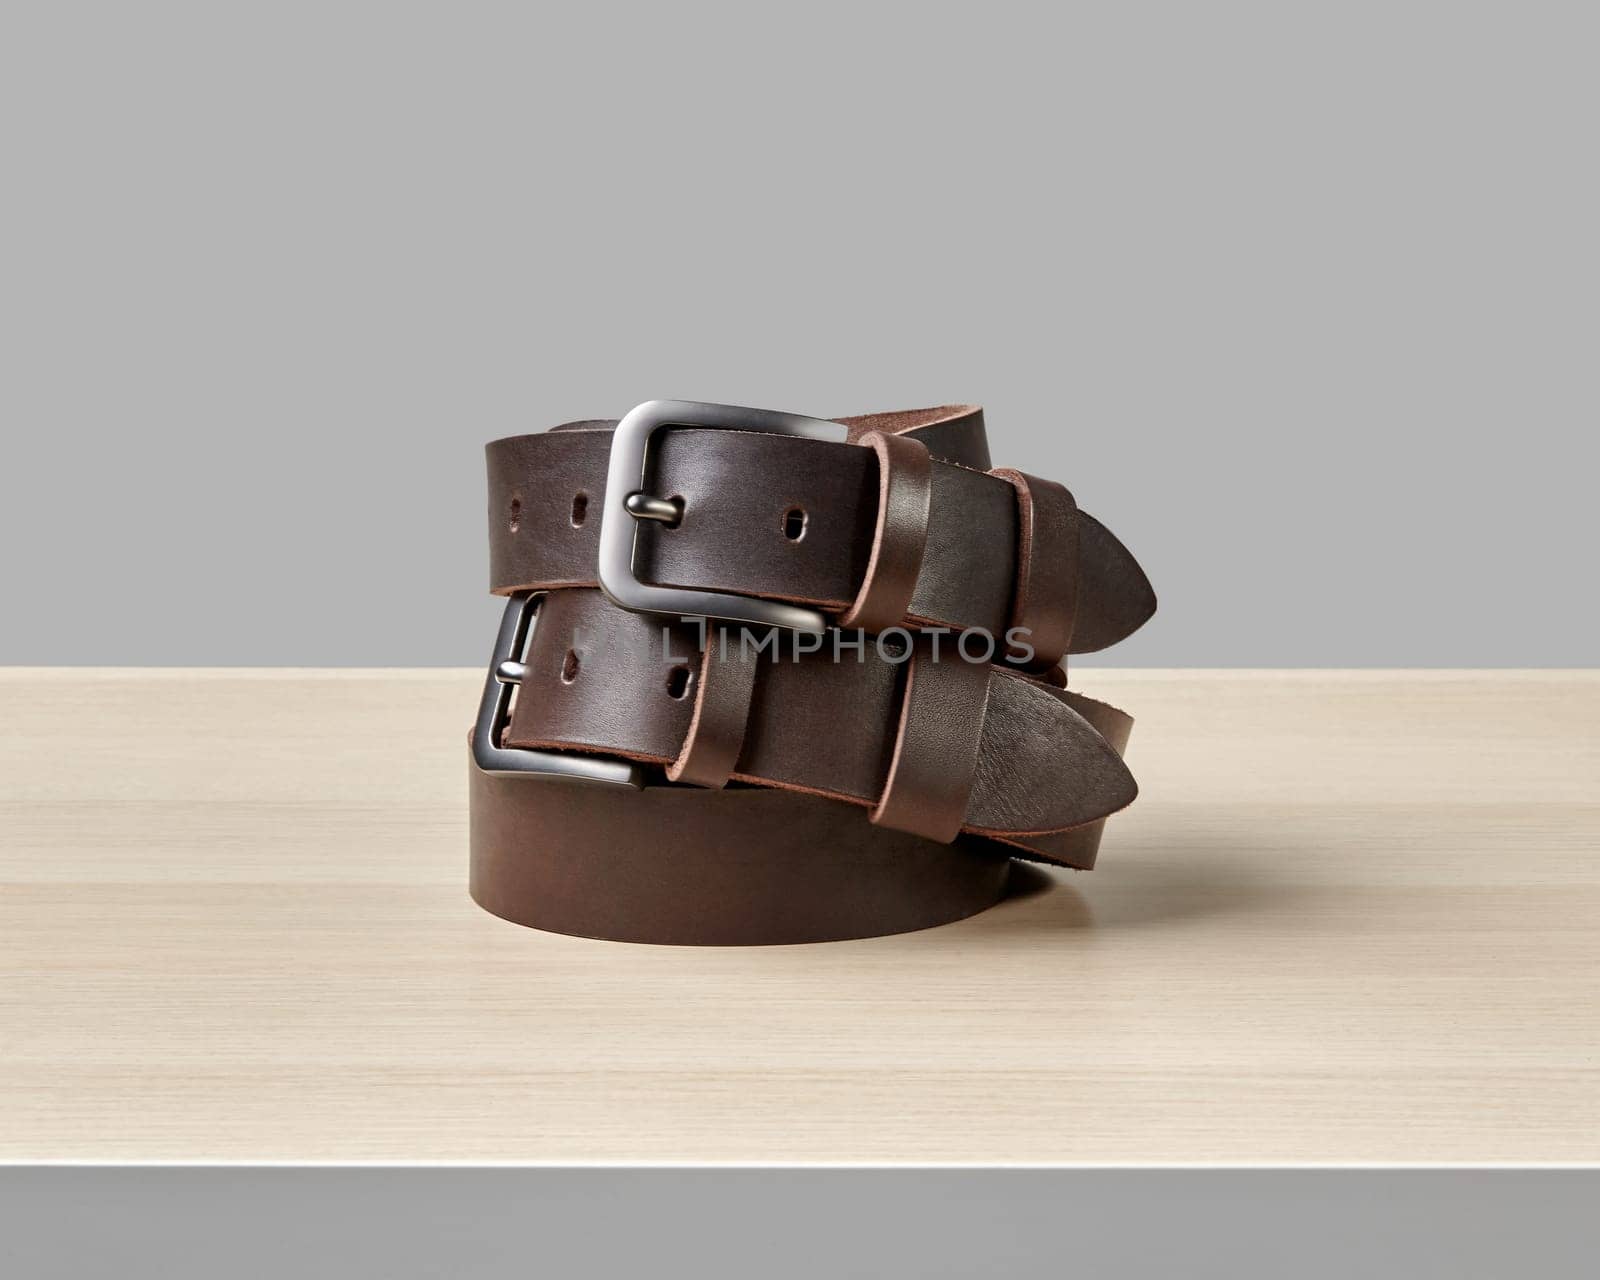 Two custom dark brown leather belts with stylish buckles and DAD embossed on loop folded on wooden table. Concept of quality craftsmanship and personalized gifts